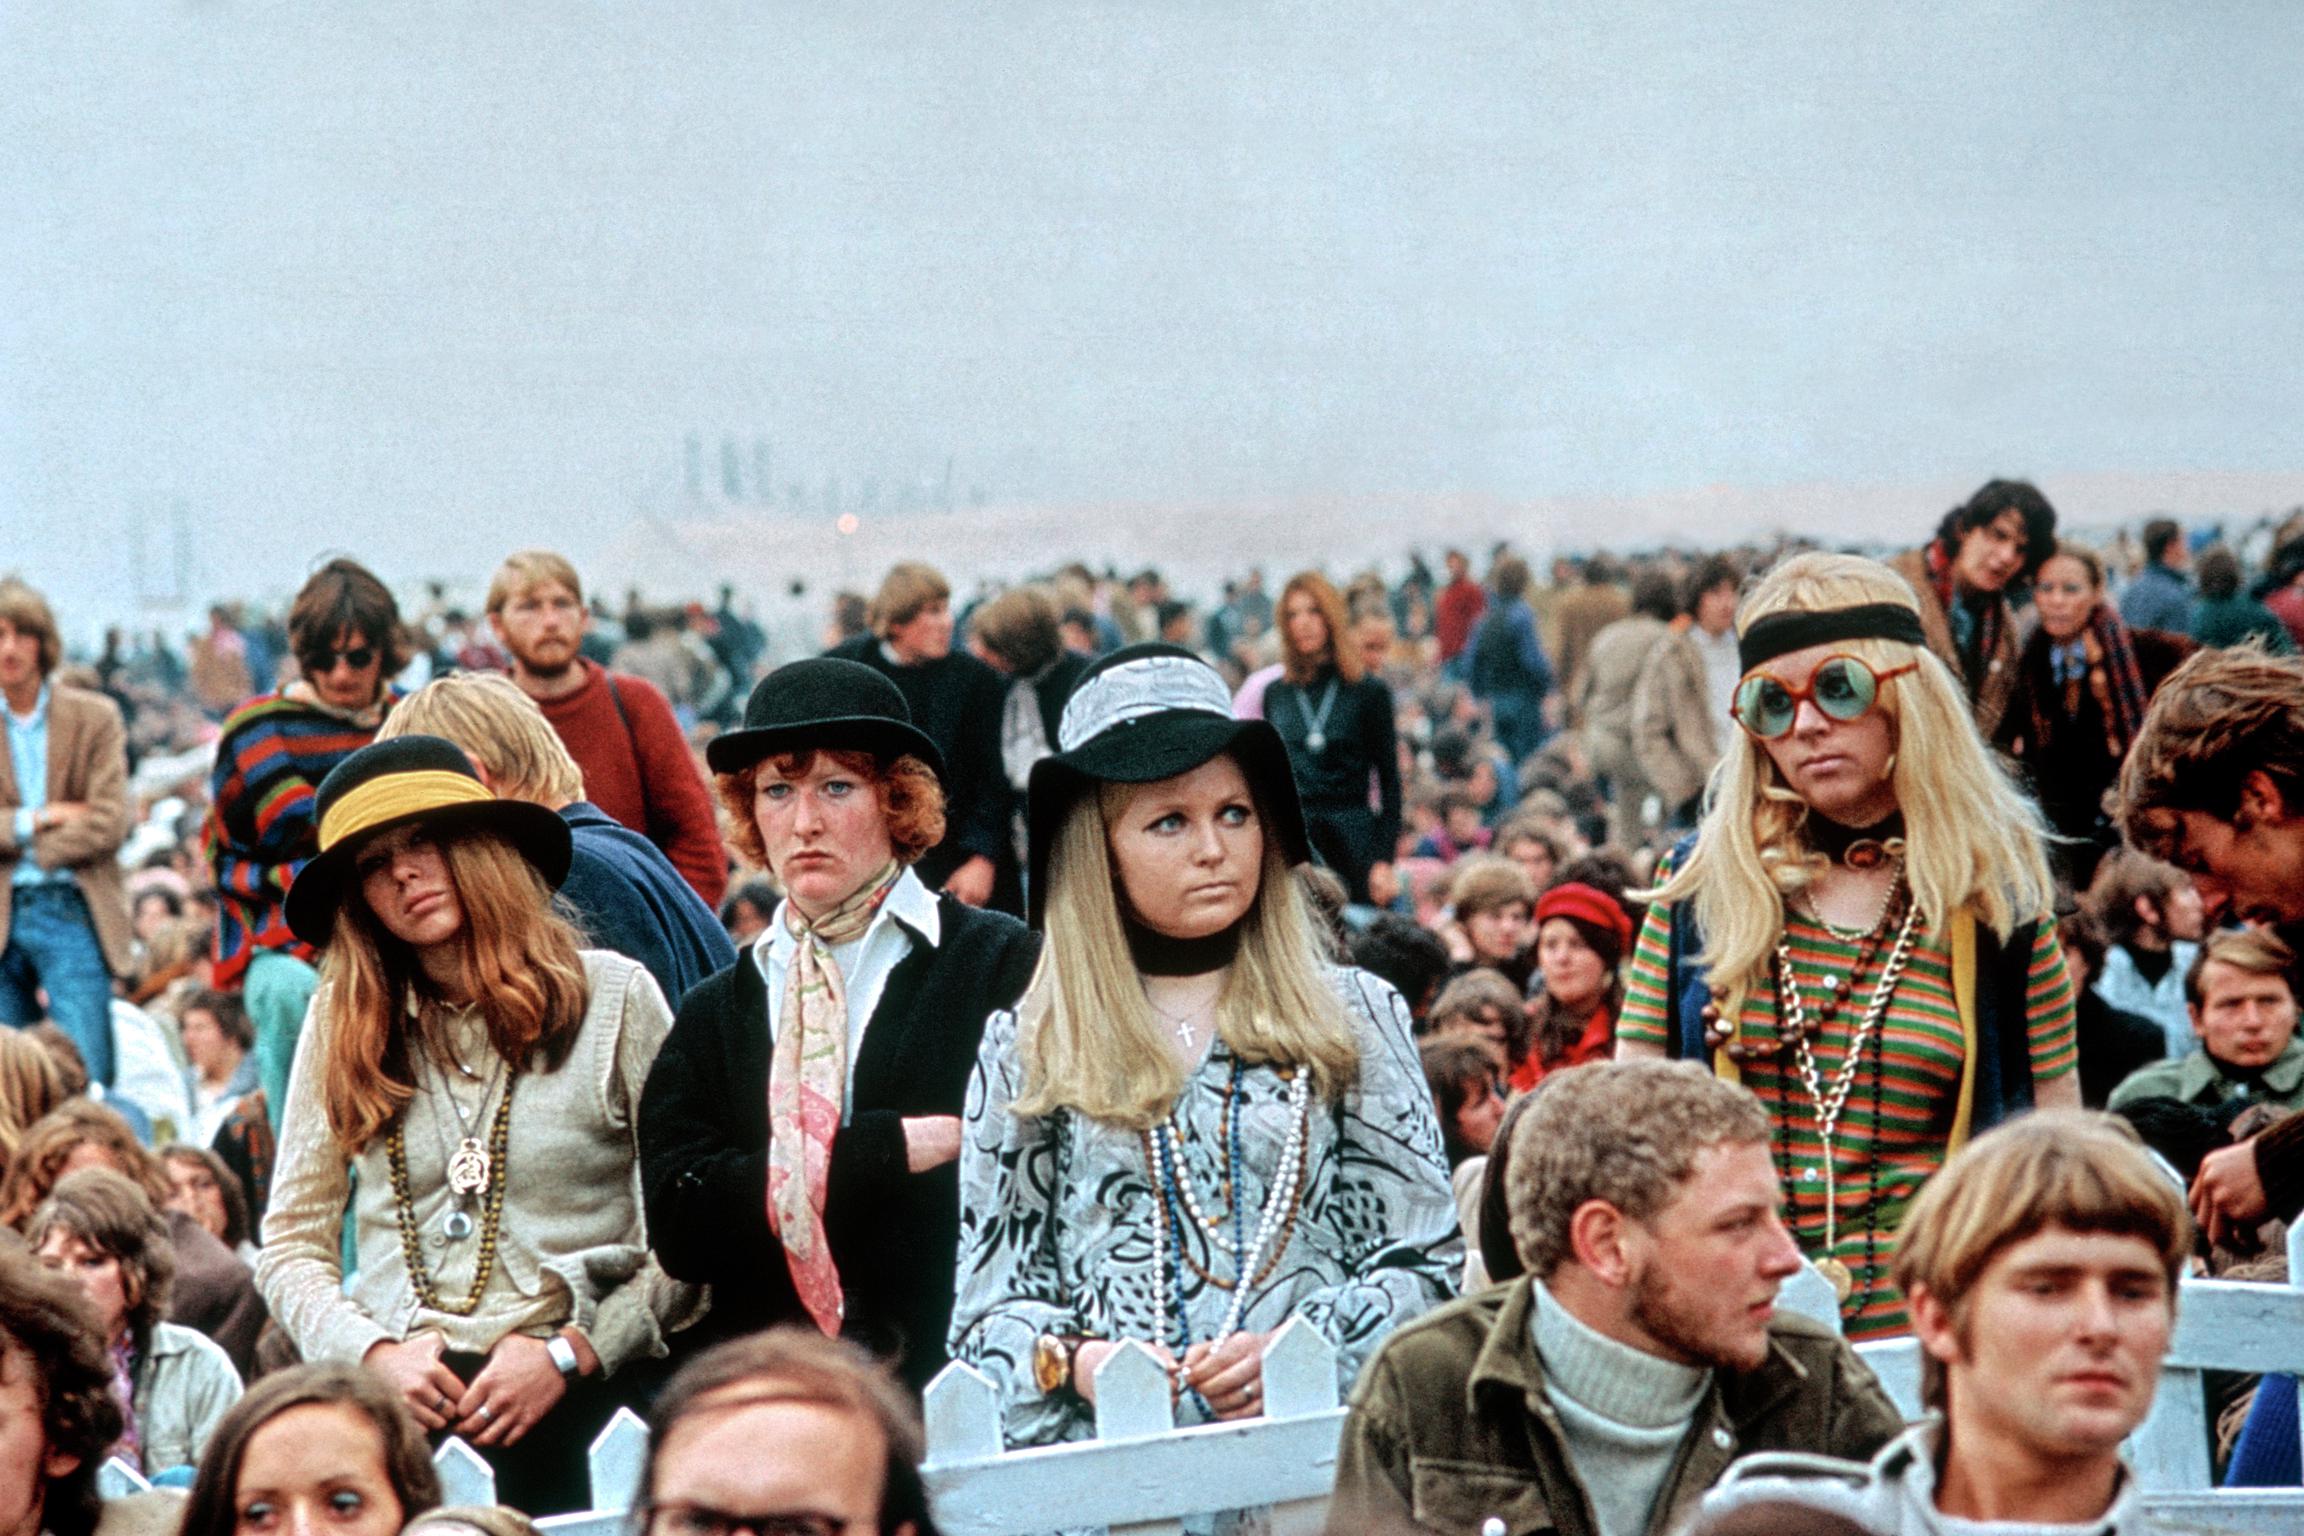 Isle of Wight Festival. Pop festivals always bring out the wildest forms of dress sense